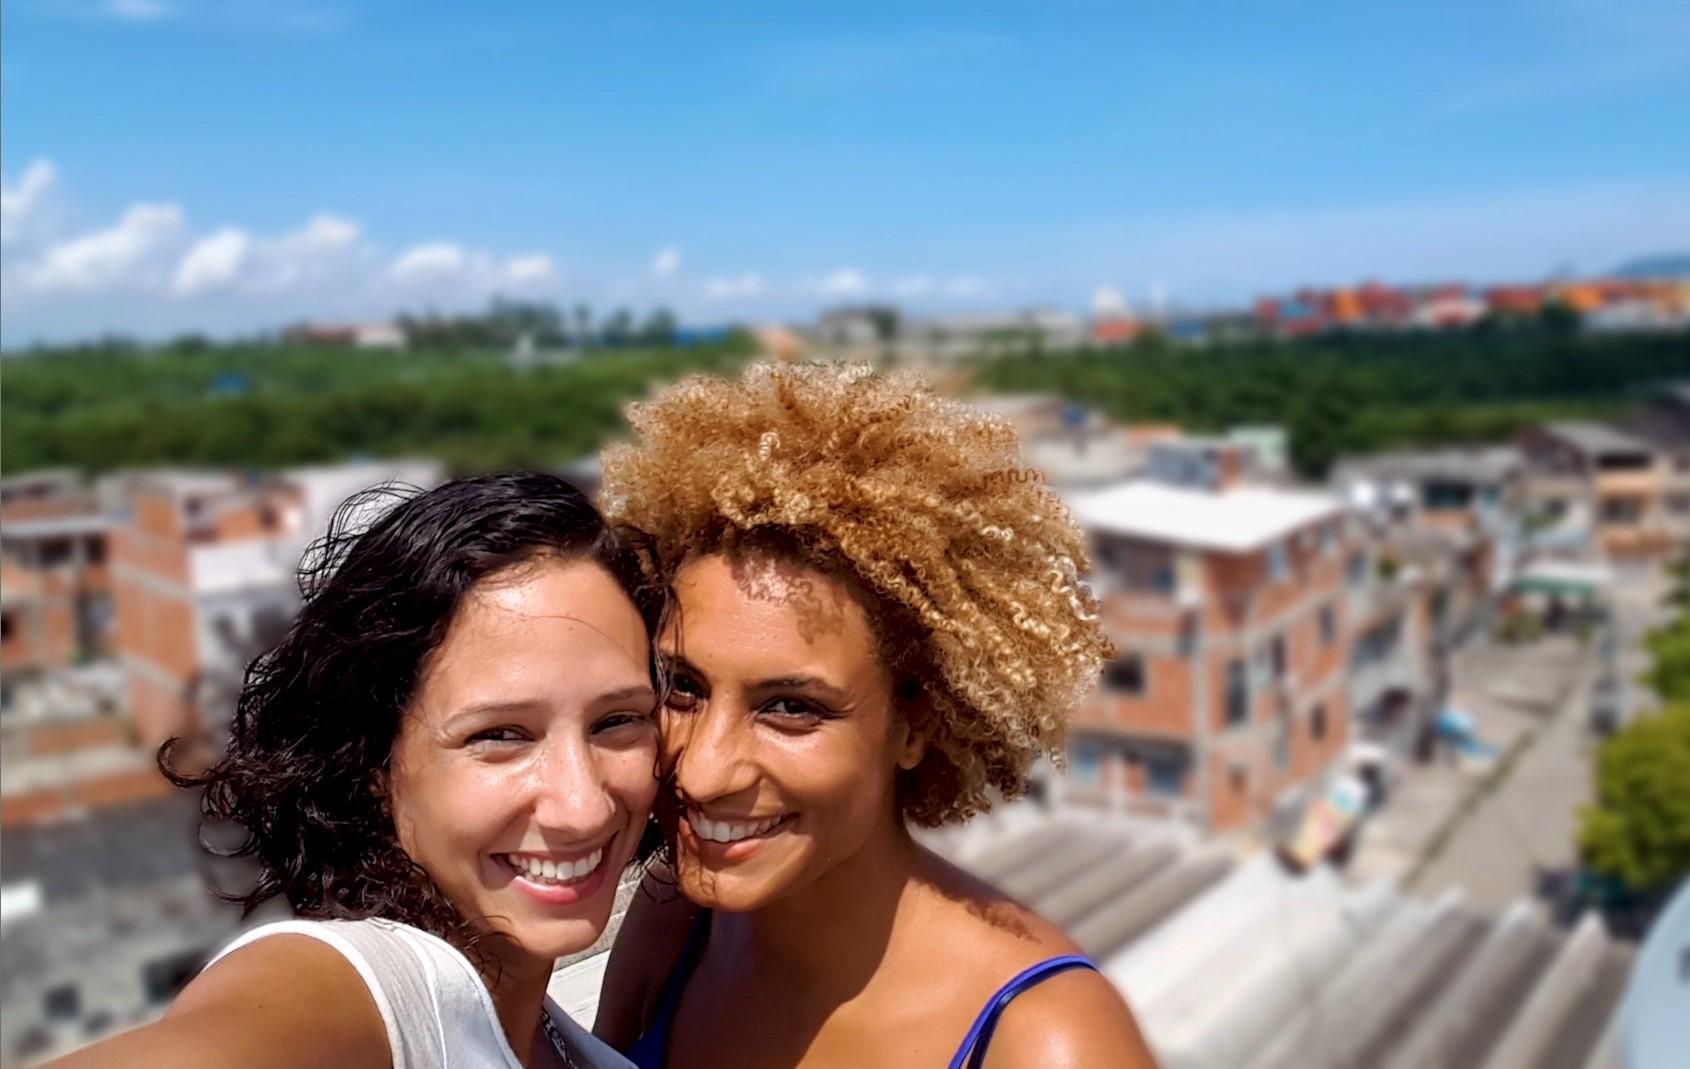 Monica Benicio (left) and Marielle Franco. Benicio says she agrees with media reports that claim the murder was planned and involved politicians and security forces